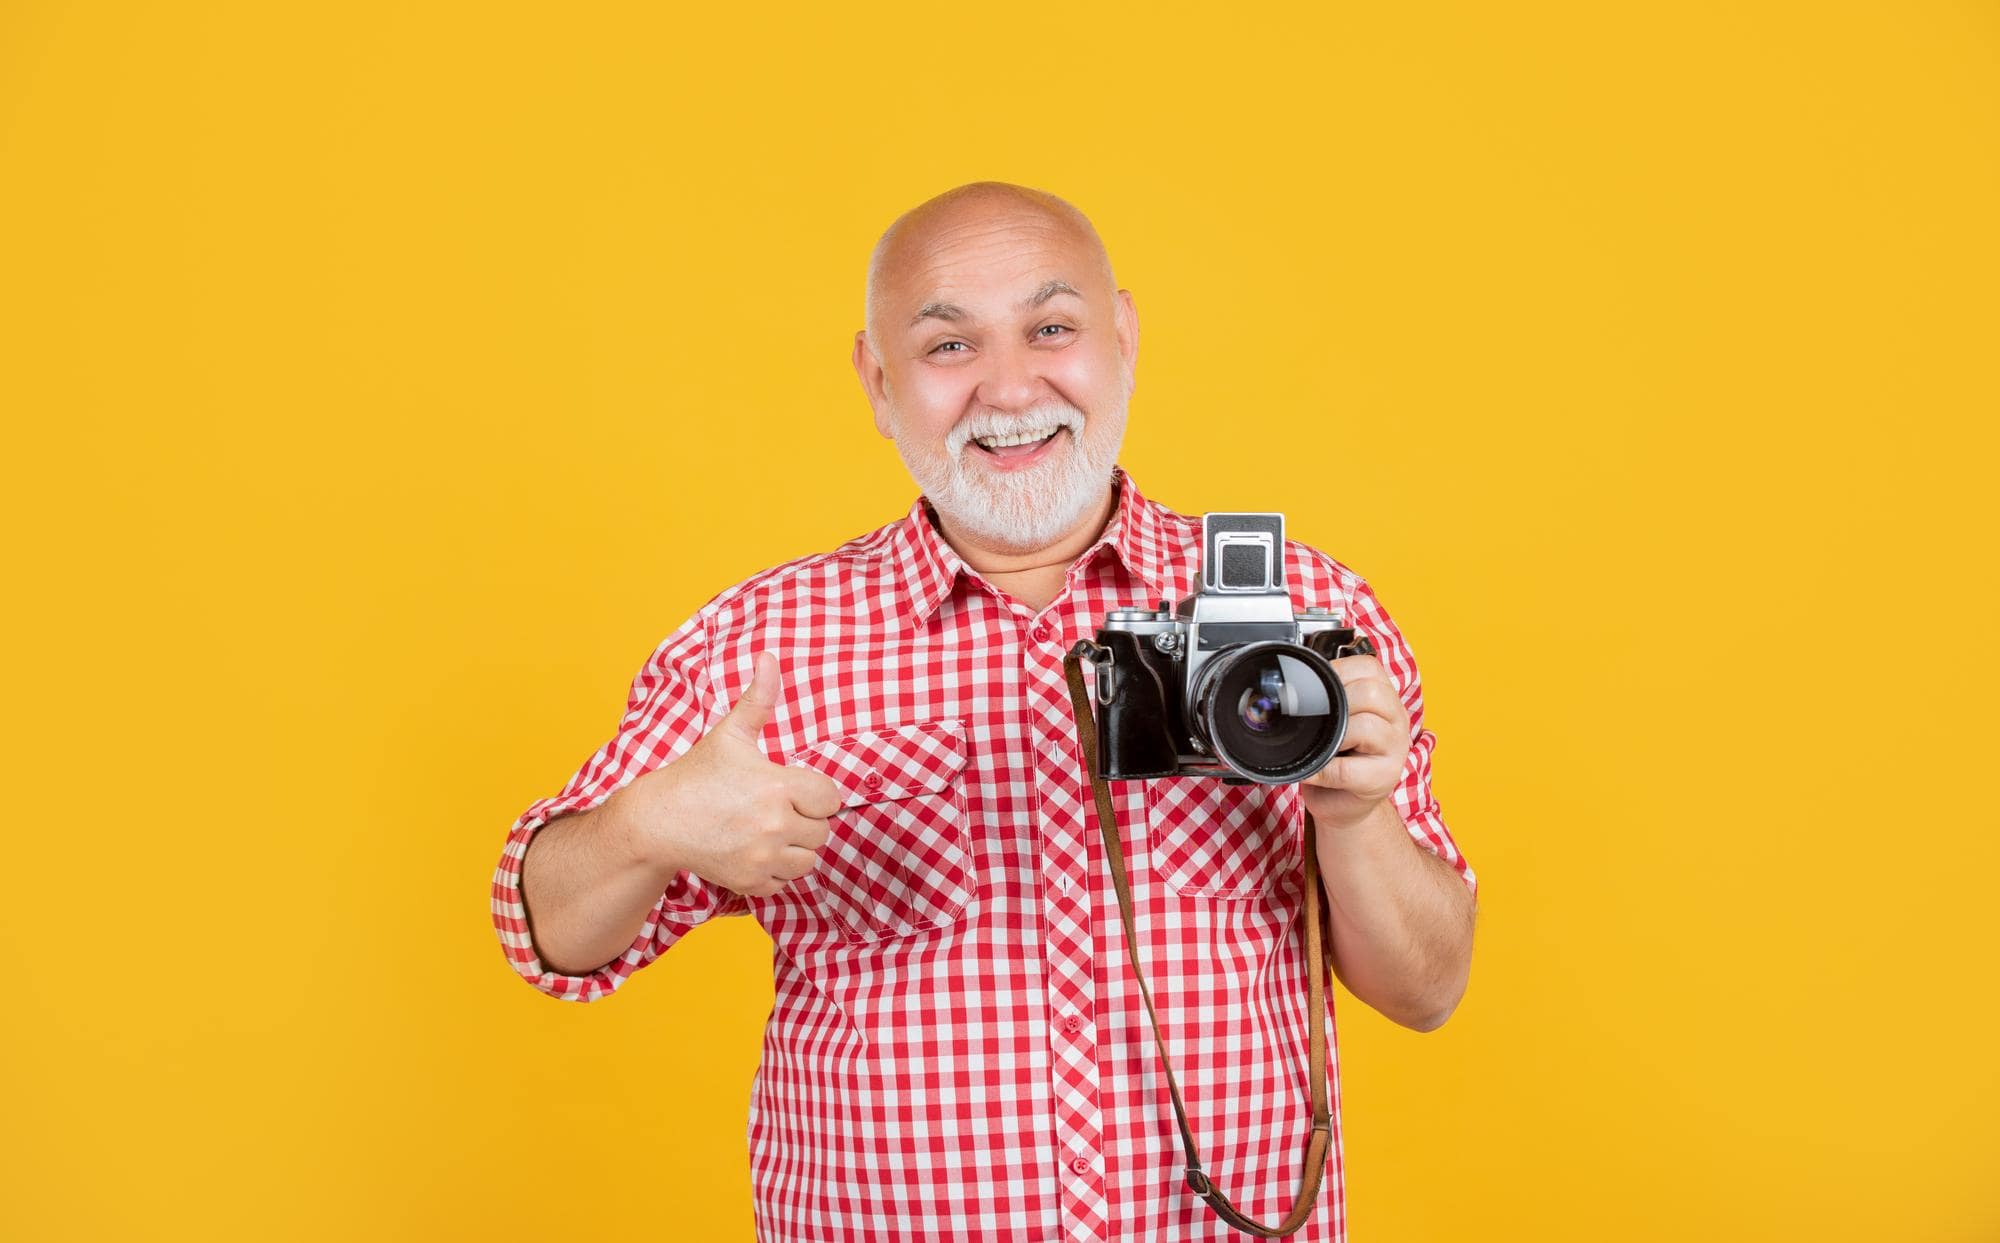 Always searching for a free photo? Want high-quality images for your career?